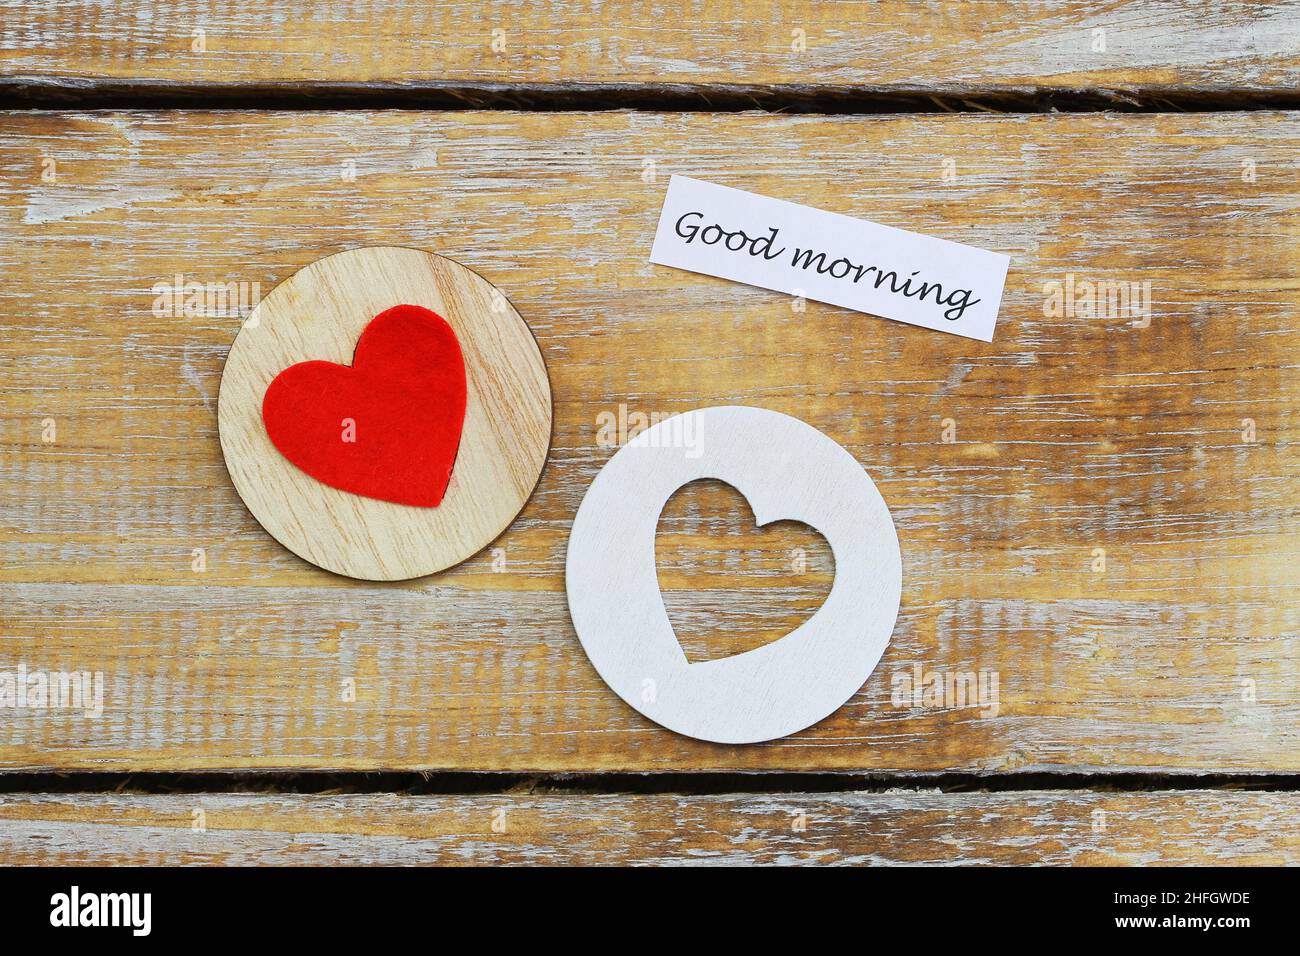 Good morning card with two wooden hearts on rustic surface Stock Photo